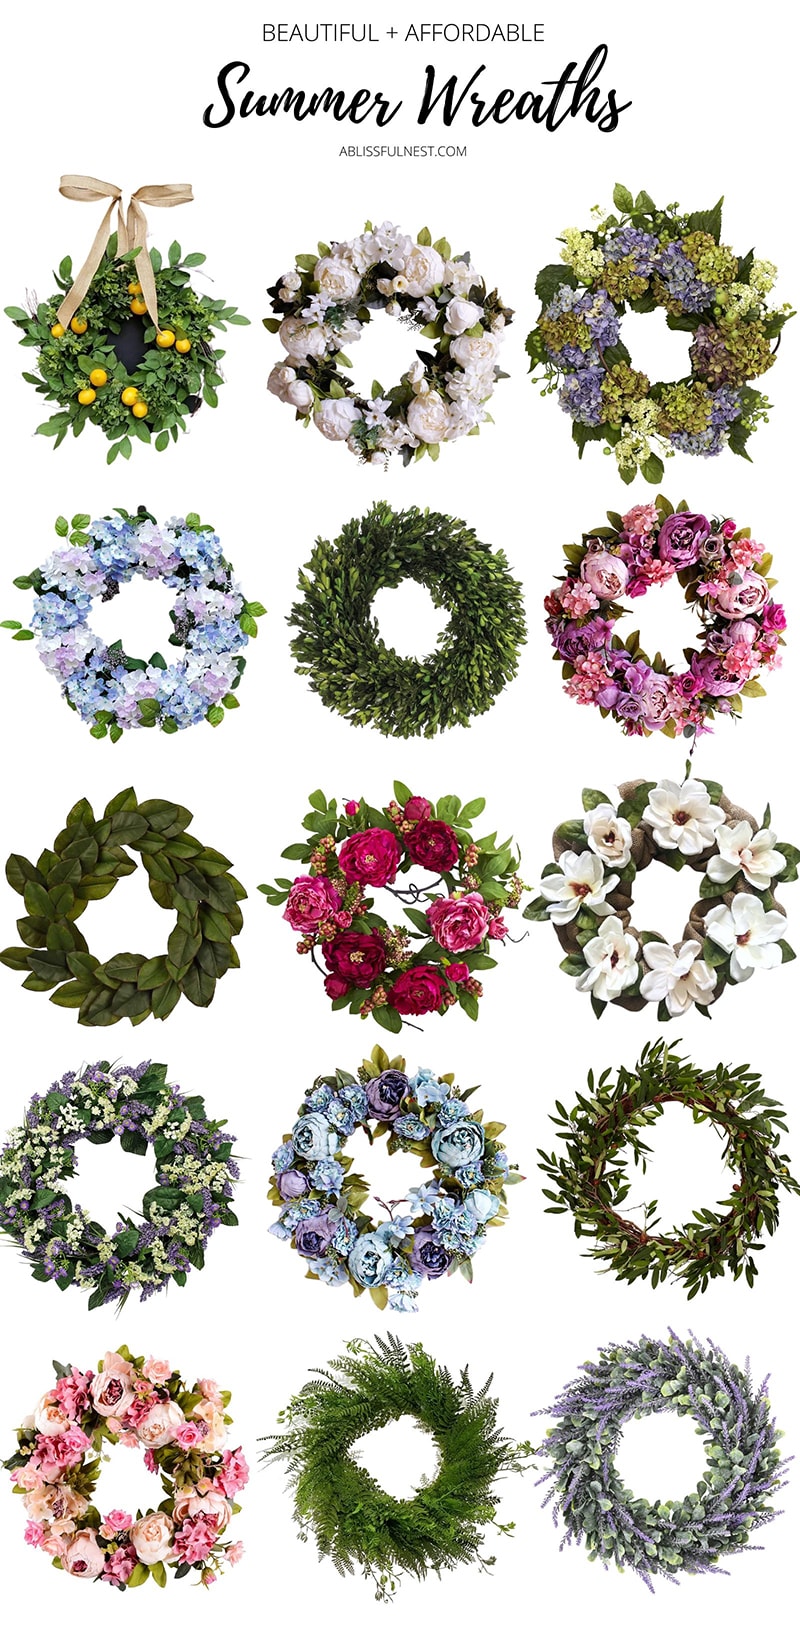 Beautiful summer wreaths for any style home - all affordable options. 